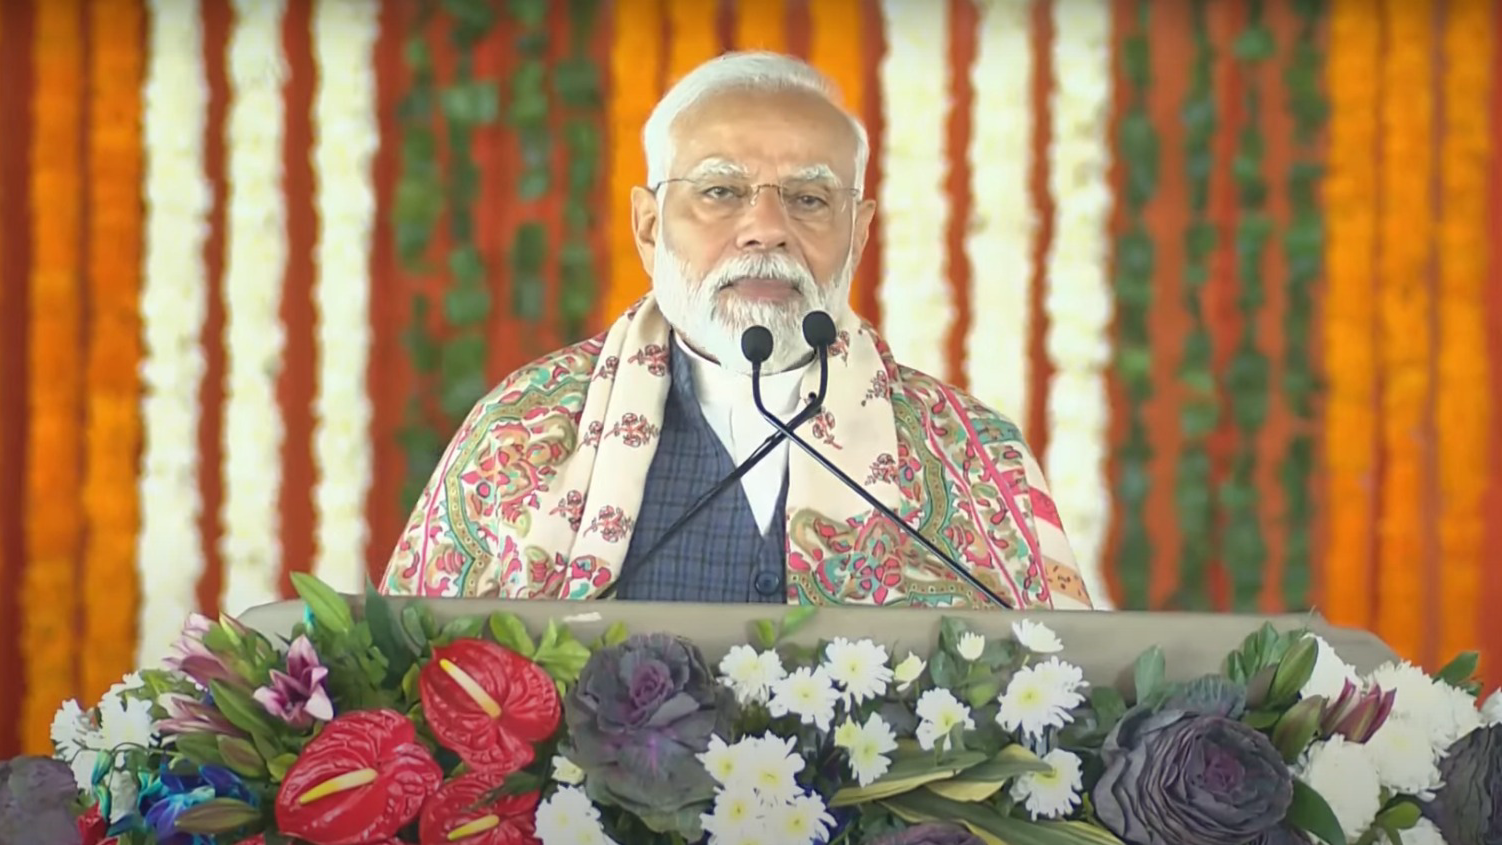 The PM was welcomed by the trustees of the Shree Kalaram Temple Trust, then he was taken around the temple precincts, took ‘darshan’. performed an ‘aarti’, was honoured with a shawl